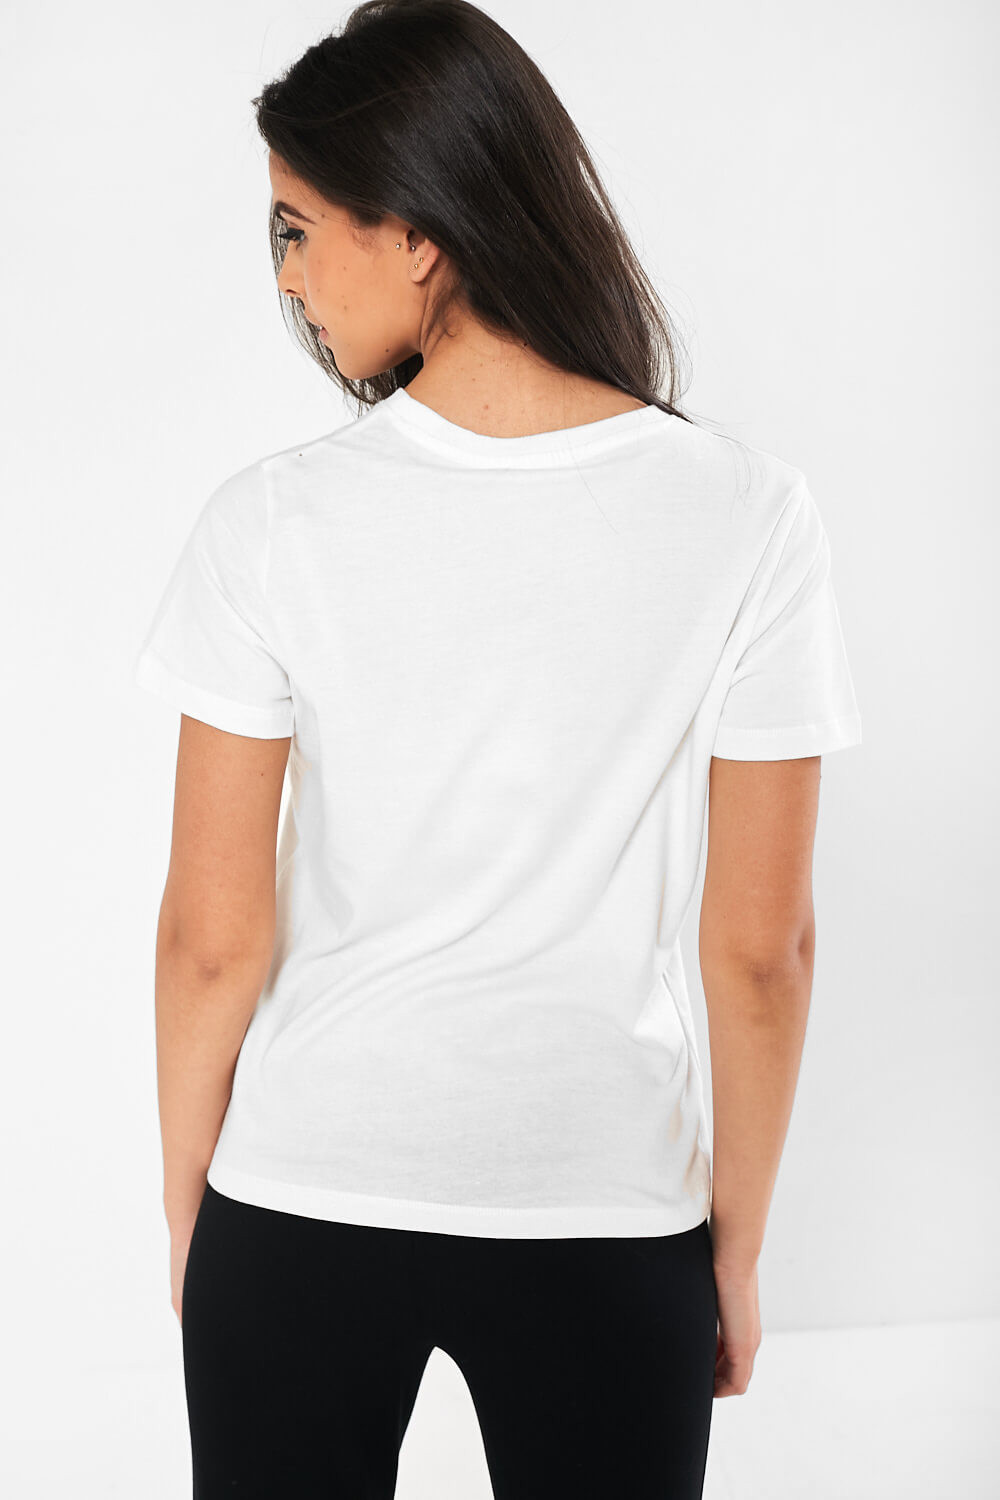 Sugarhill Maggie Easy Tiger Slogan T-shirt in White | iCLOTHING